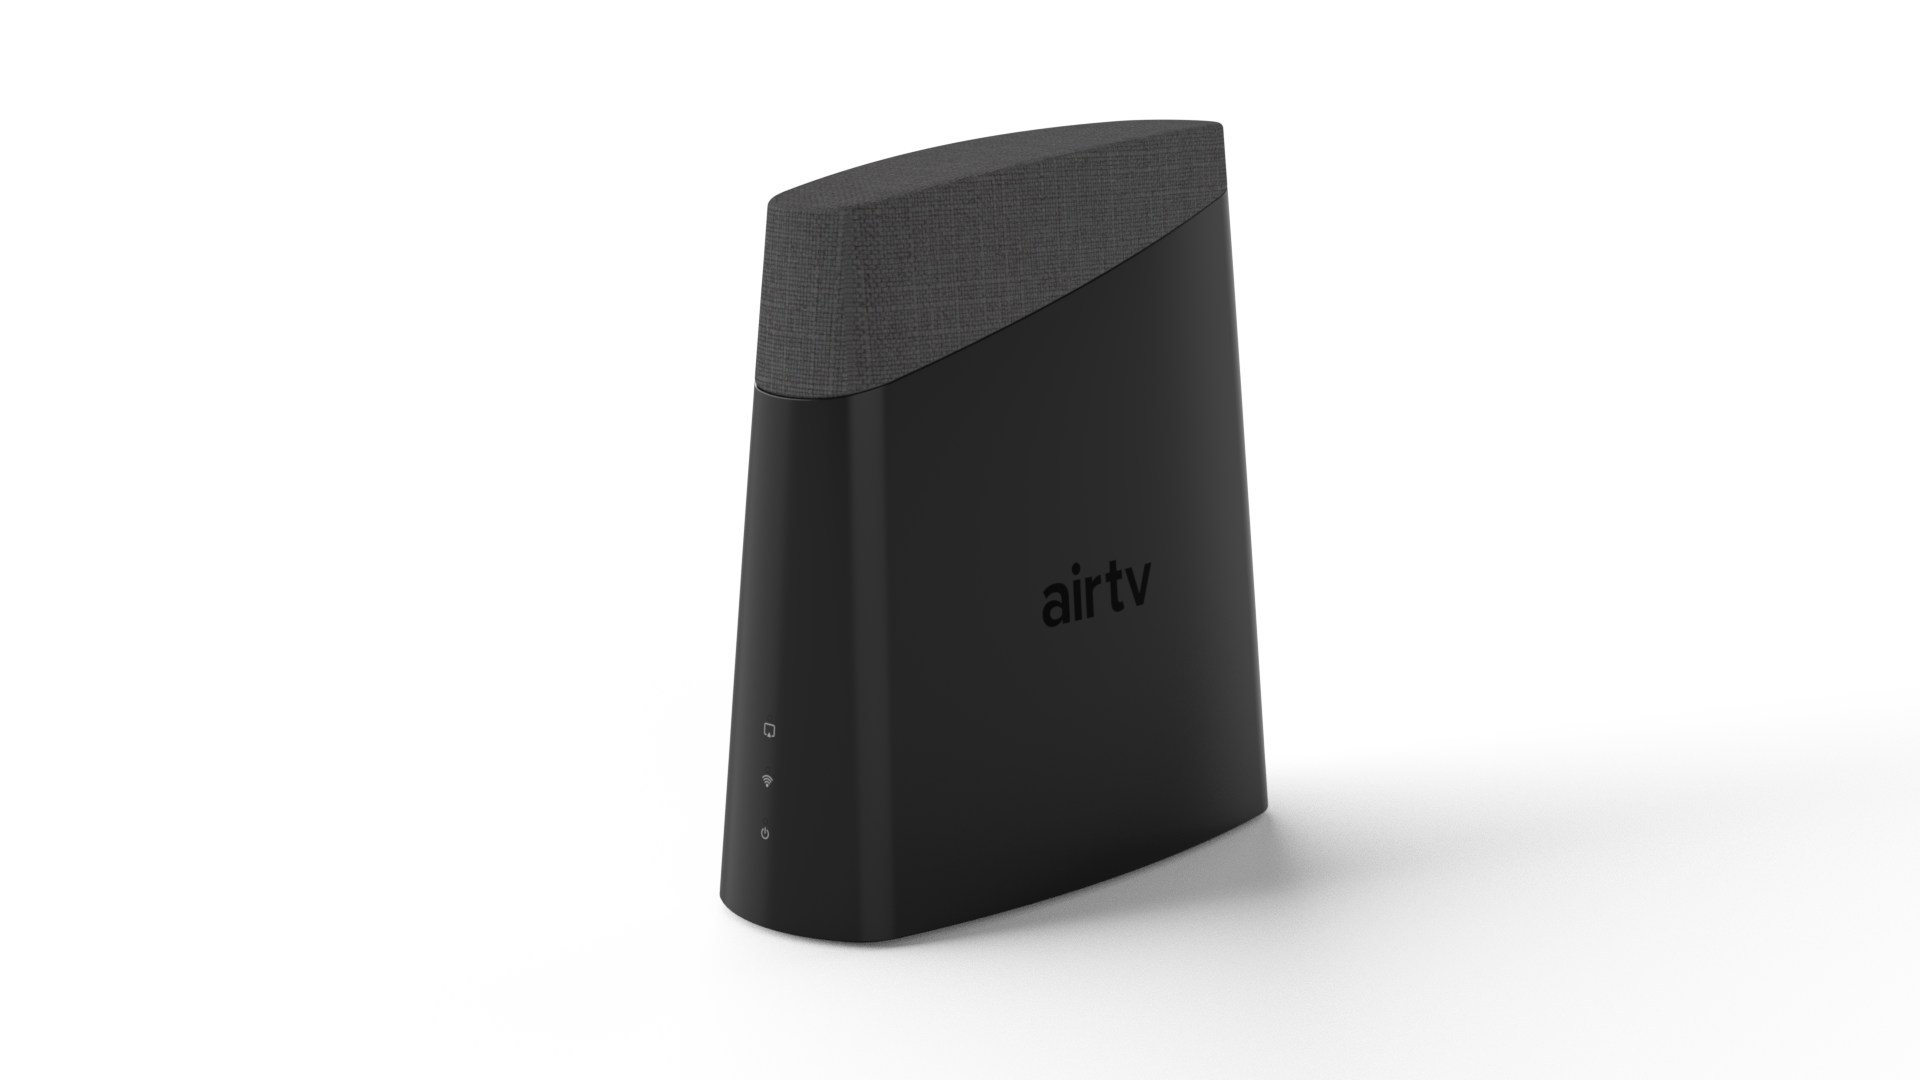 The Fresh AirTV Anyplace Adds Streaming and DVR Functionality to Native TV